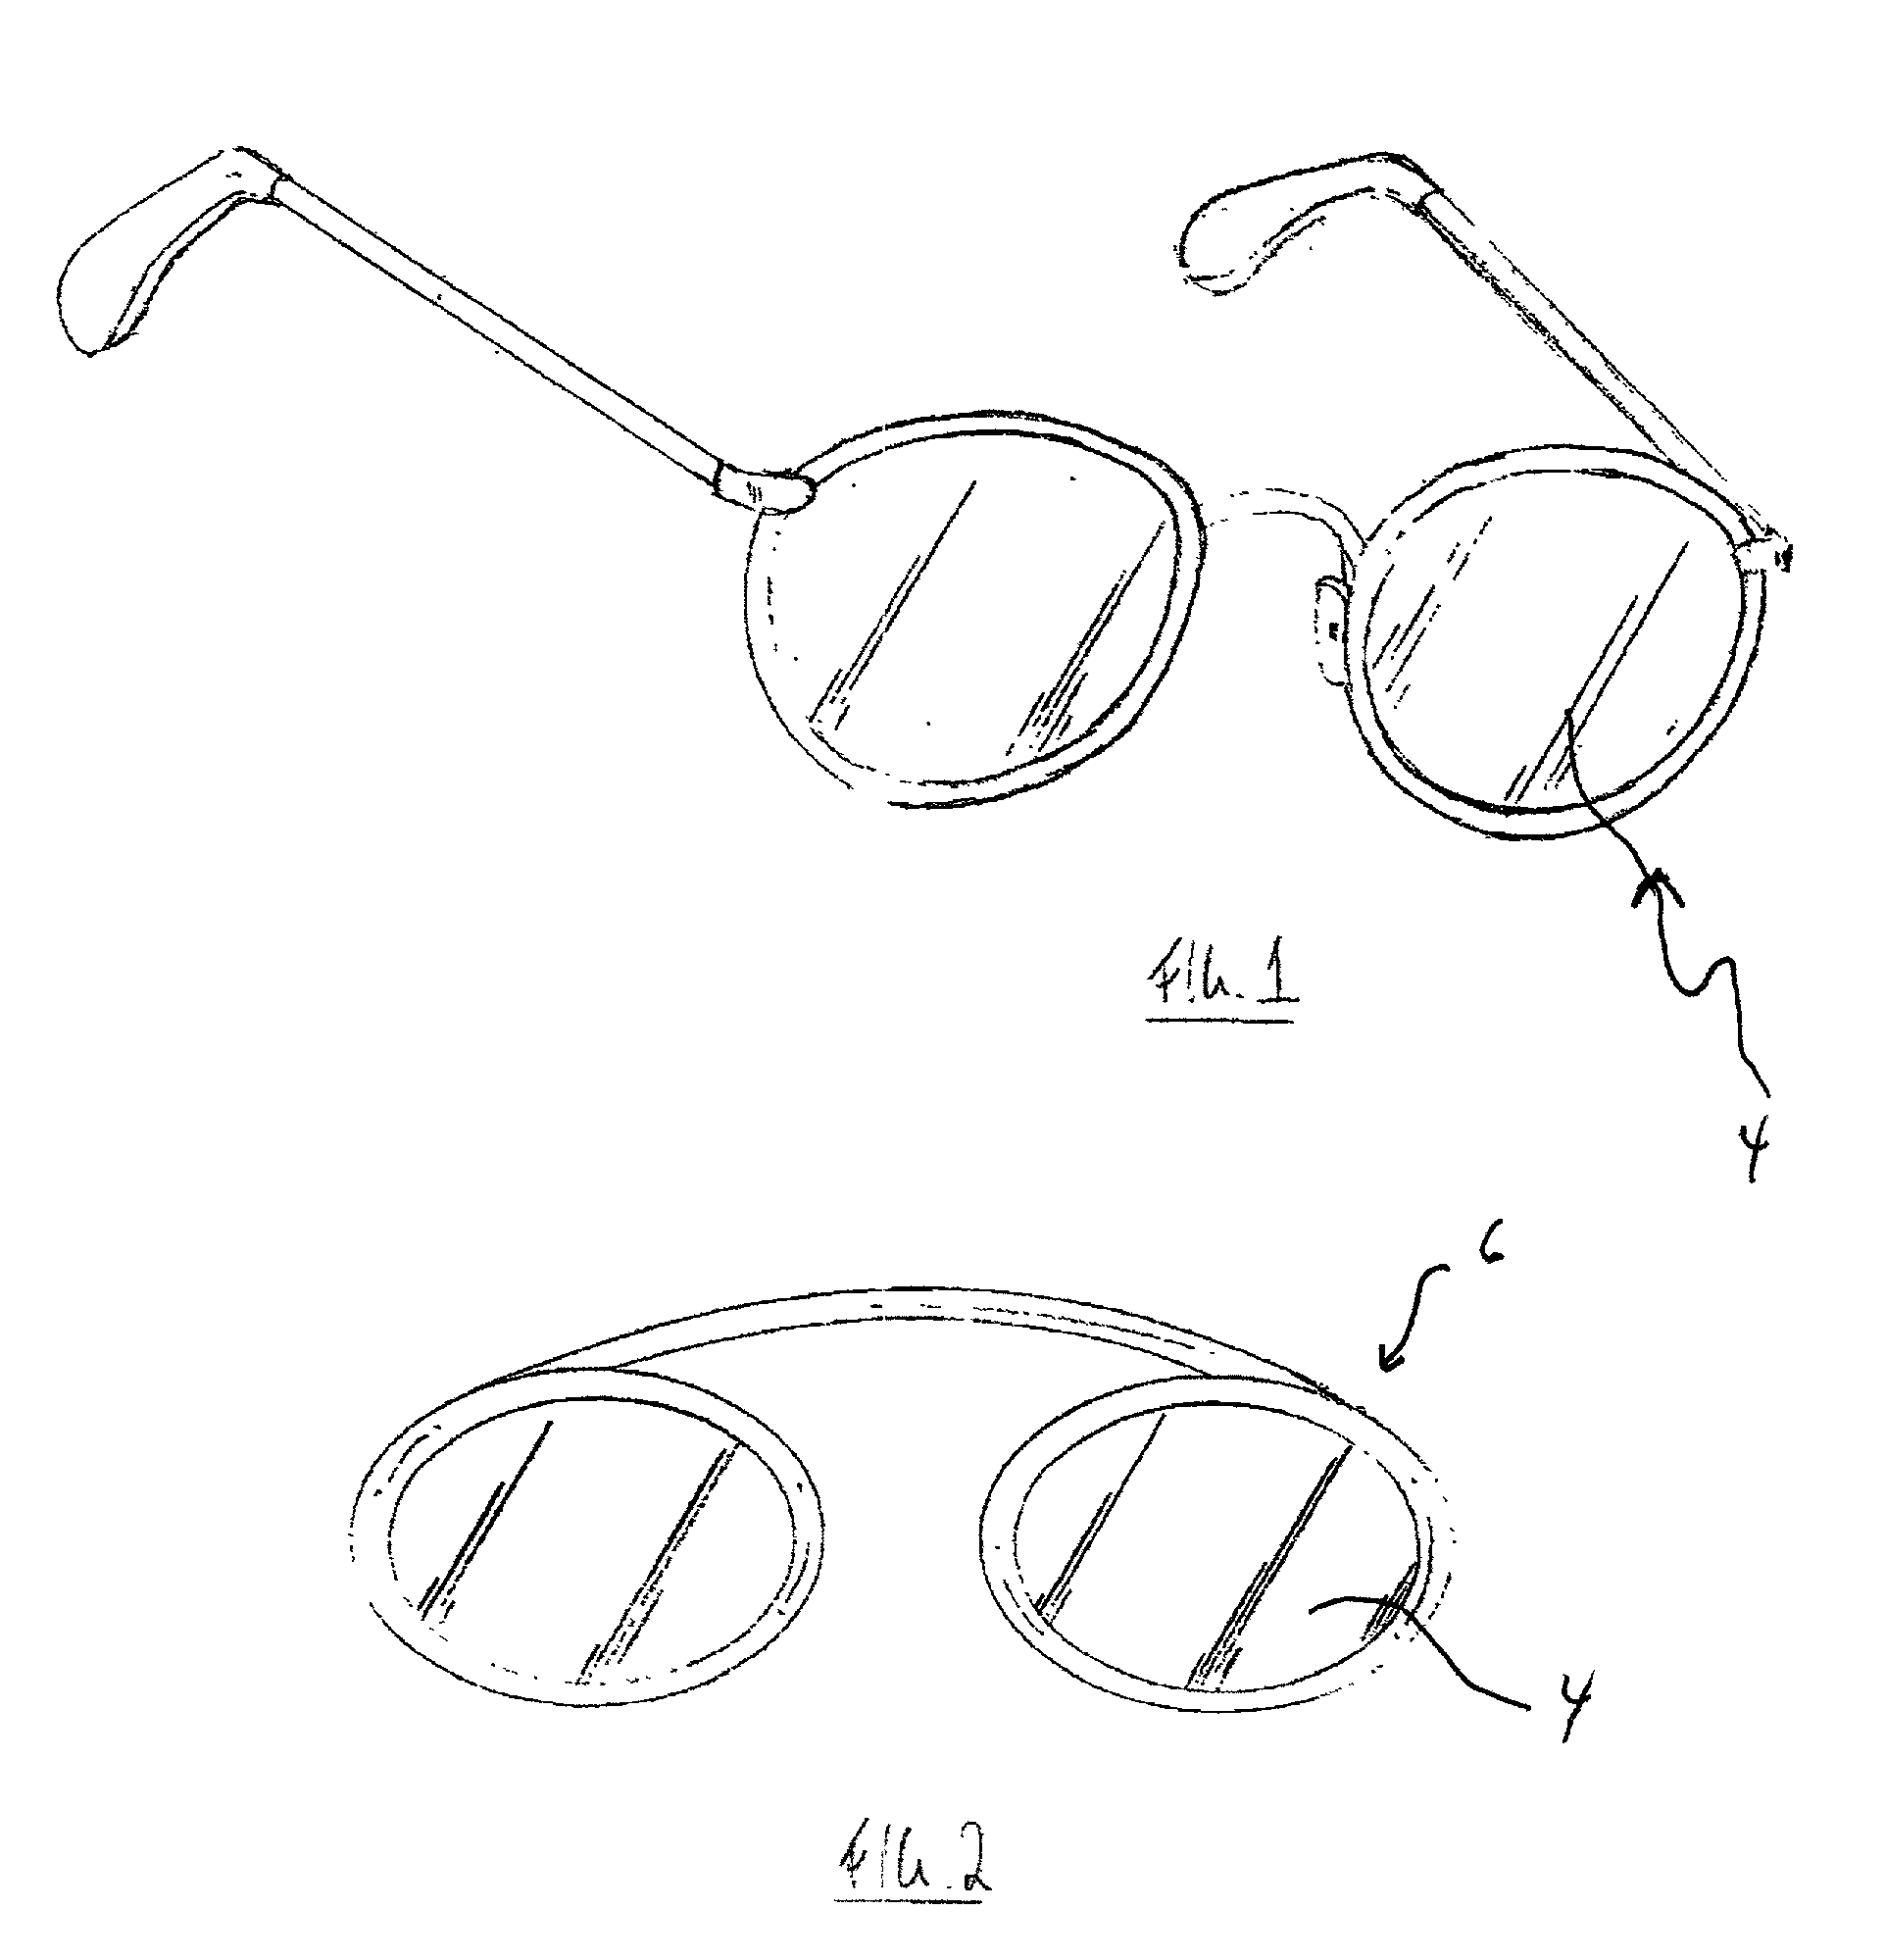 Optical lens for improved vision under conditions of low or poor illumination